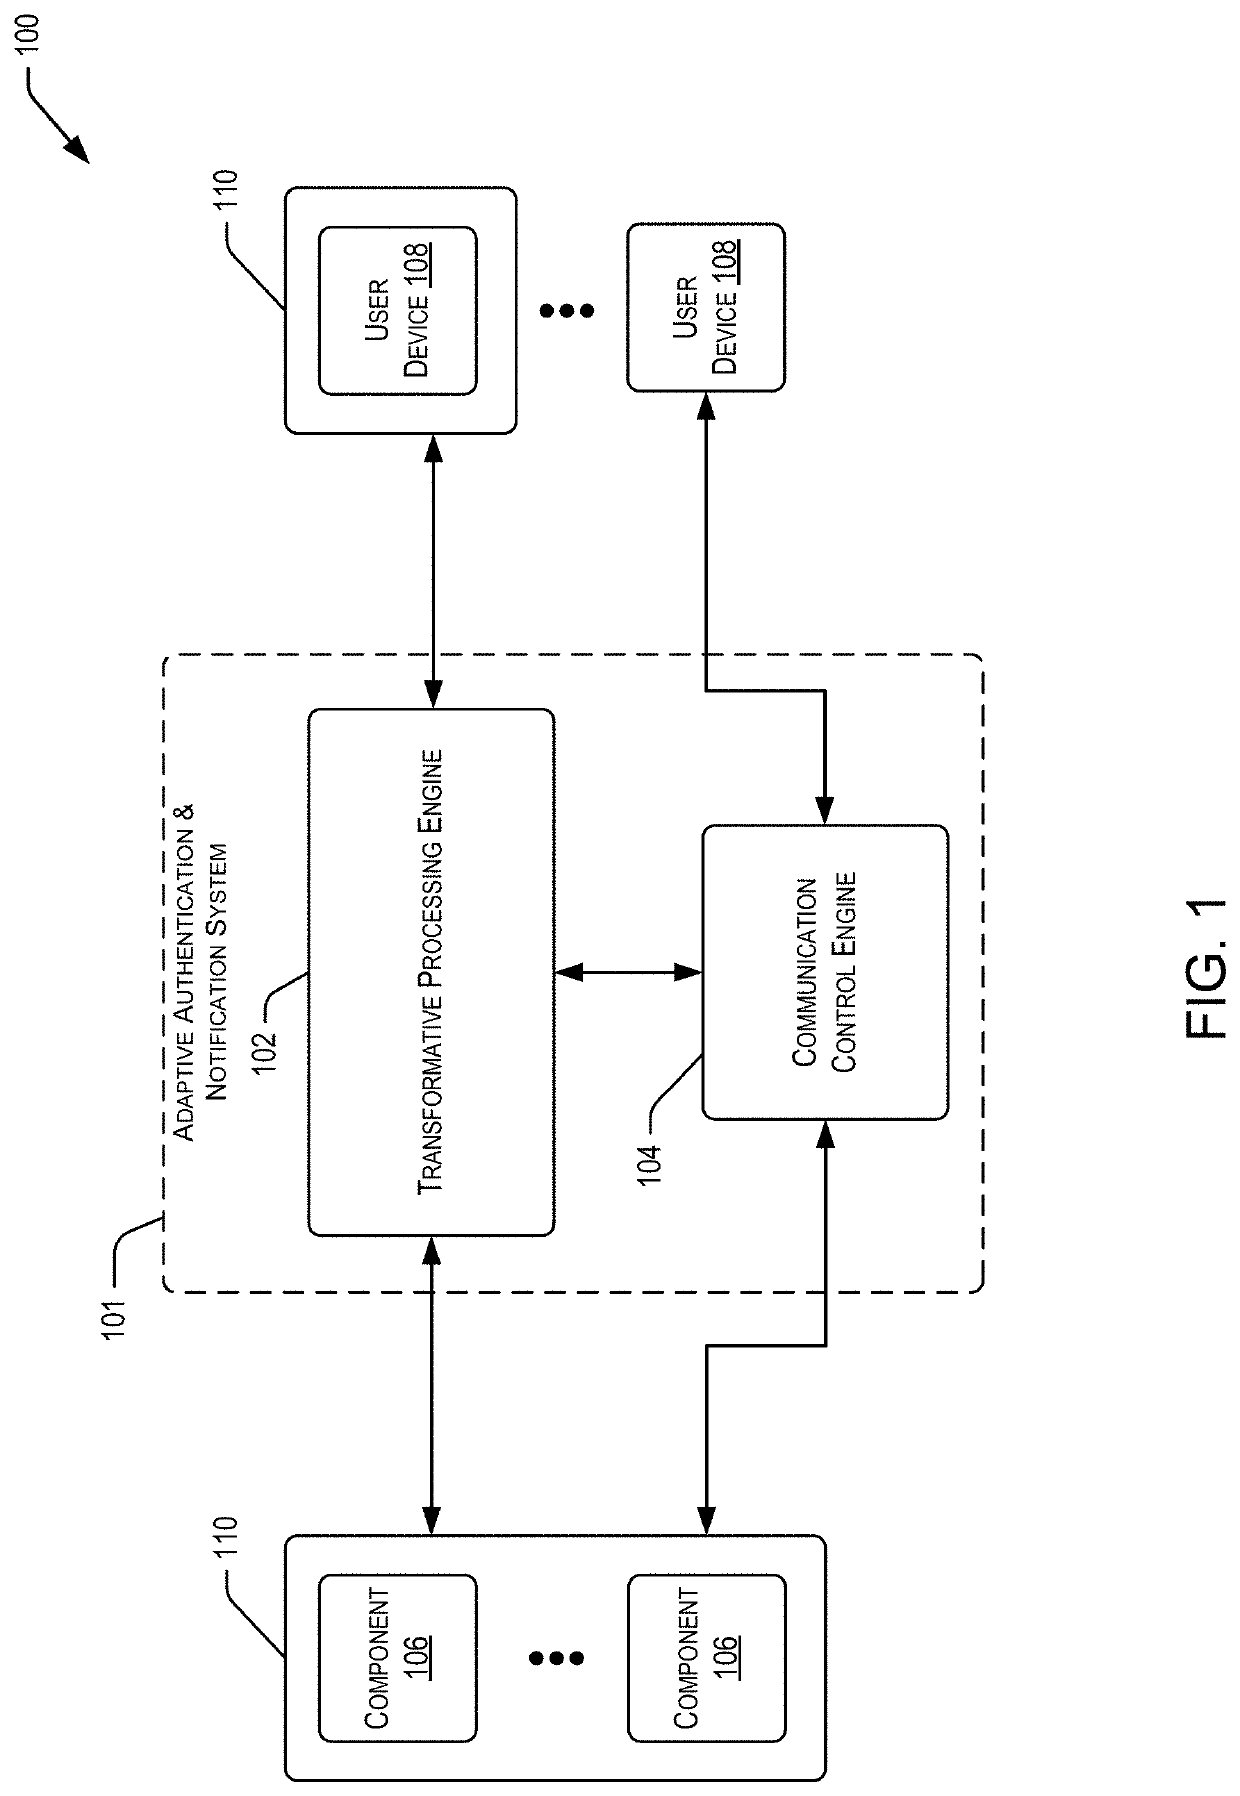 Systems and methods for switch stack emulation, monitoring, and control